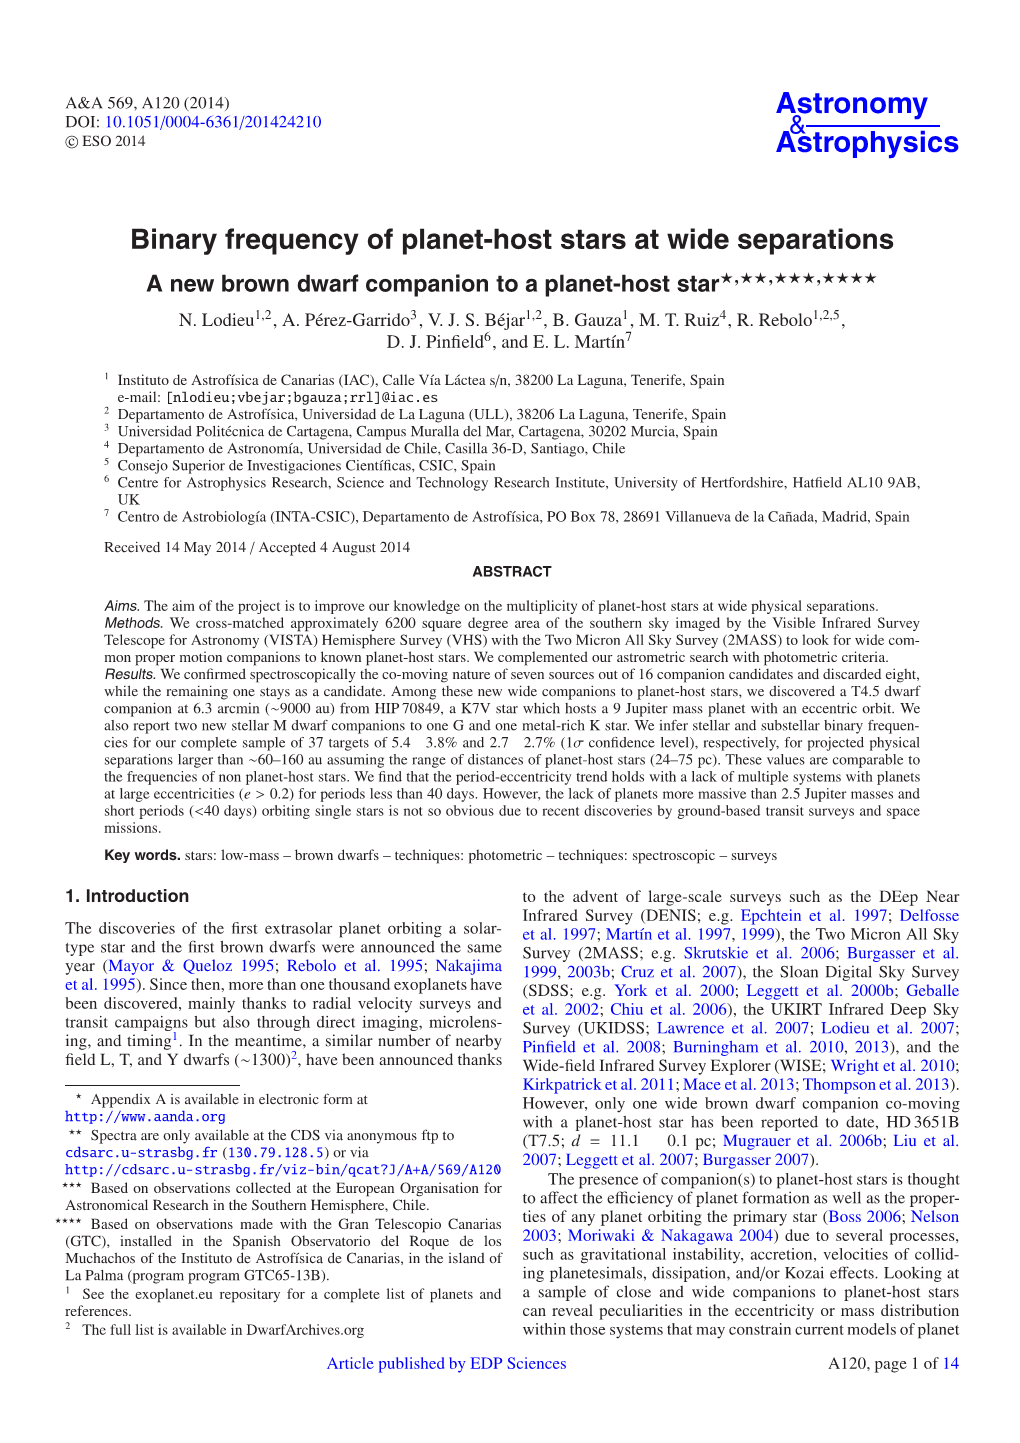 Binary Frequency of Planet-Host Stars at Wide Separations a New Brown Dwarf Companion to a Planet-Host Star�,��,���,���� N